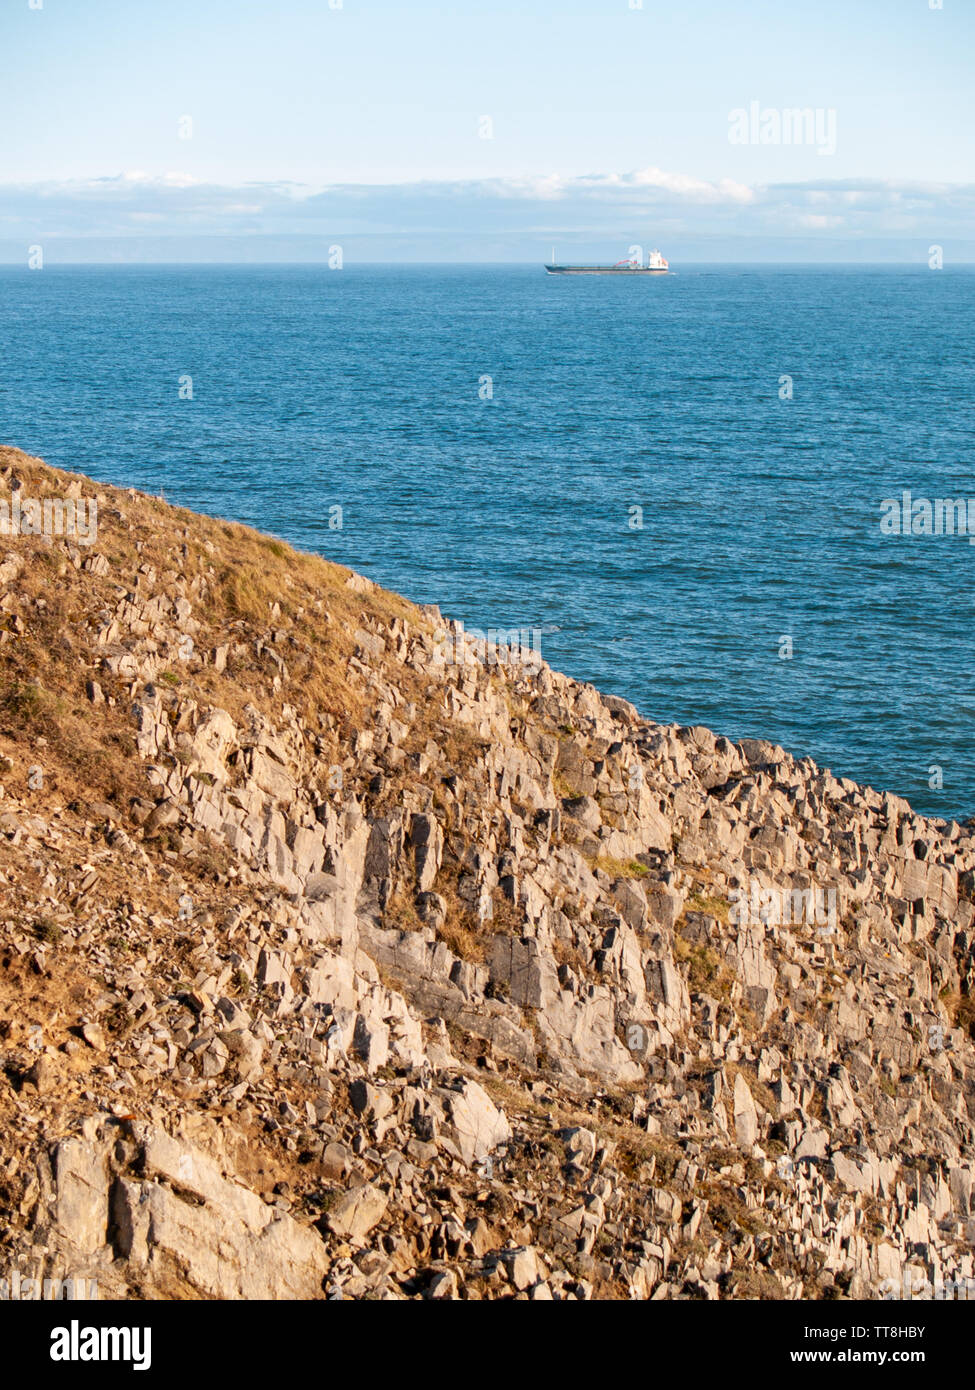 A ship on the horizon with the north coast of Devon visible behind it on the coastal path between Langland Bay and Caswell Bay on Gower, Wales, UK Stock Photo